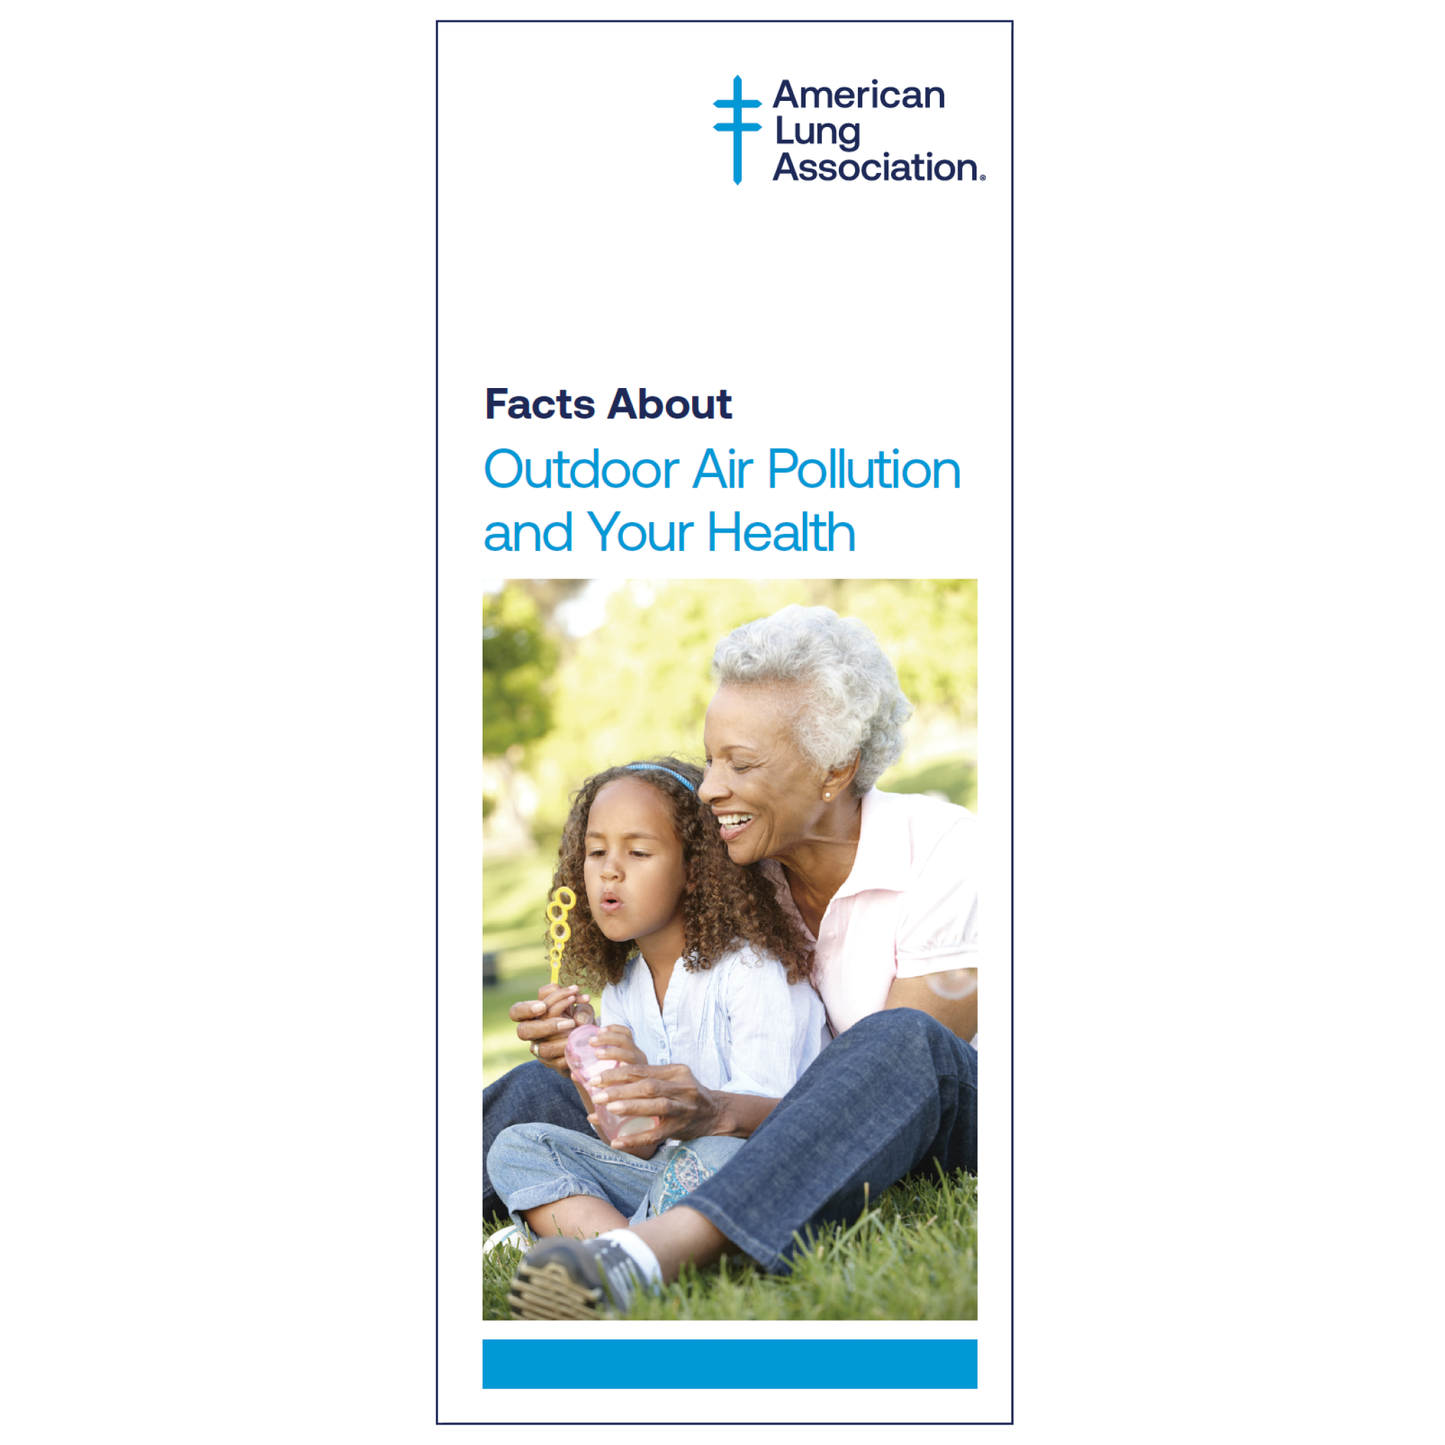 Facts About Outdoor Air Pollution and Your Health